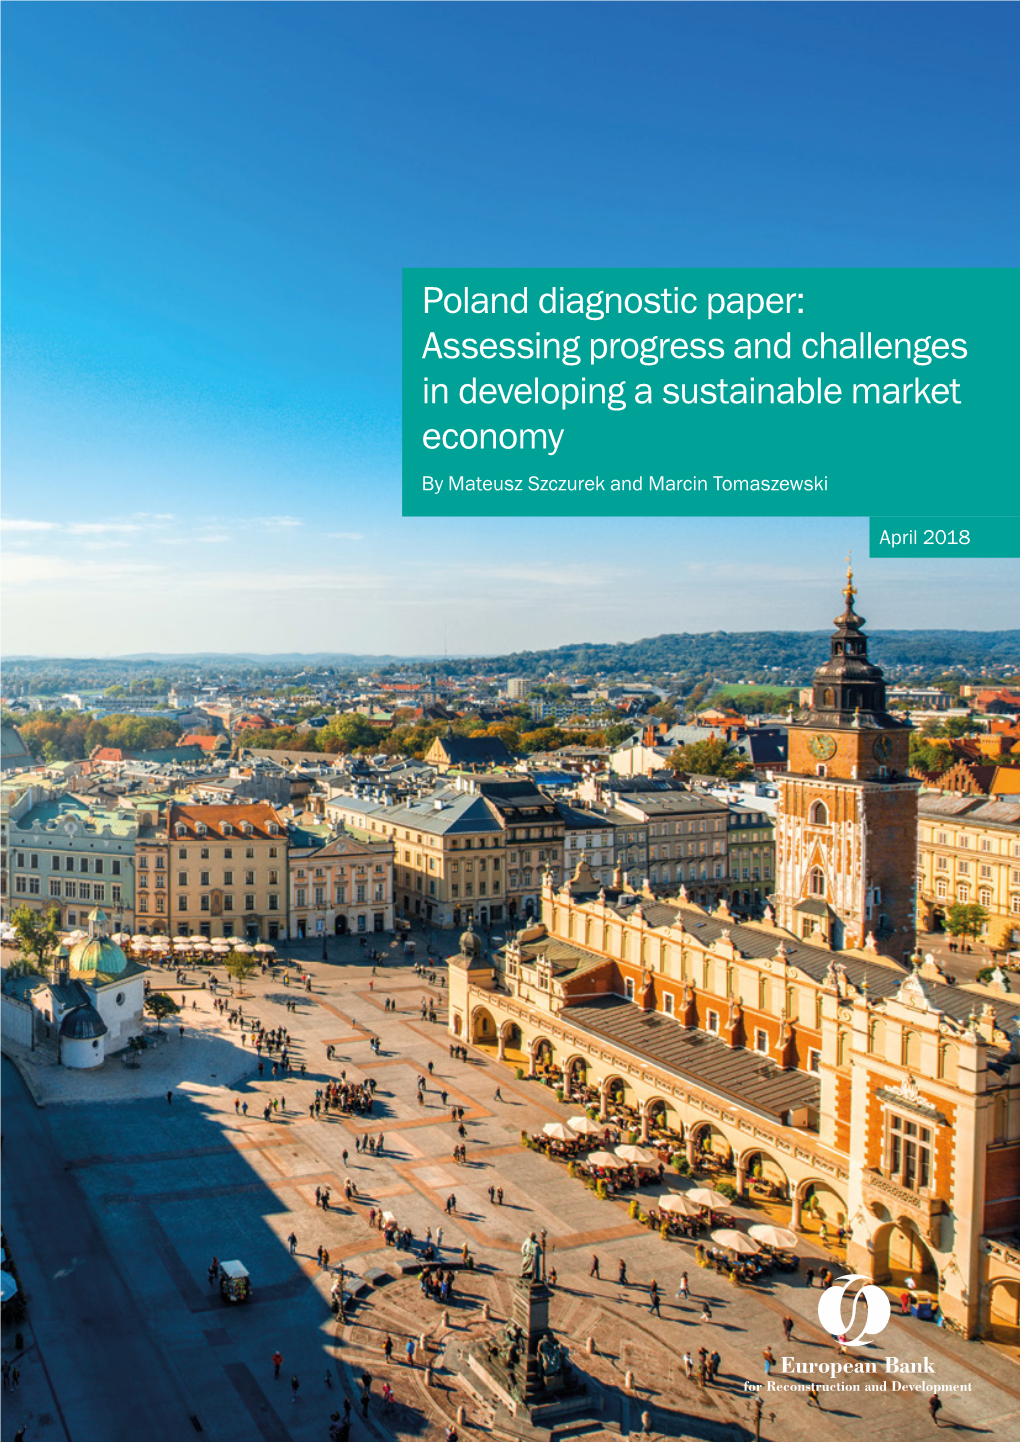 Poland Diagnostic Paper: Assessing Progress and Challenges in Developing a Sustainable Market Economy by Mateusz Szczurek and Marcin Tomaszewski